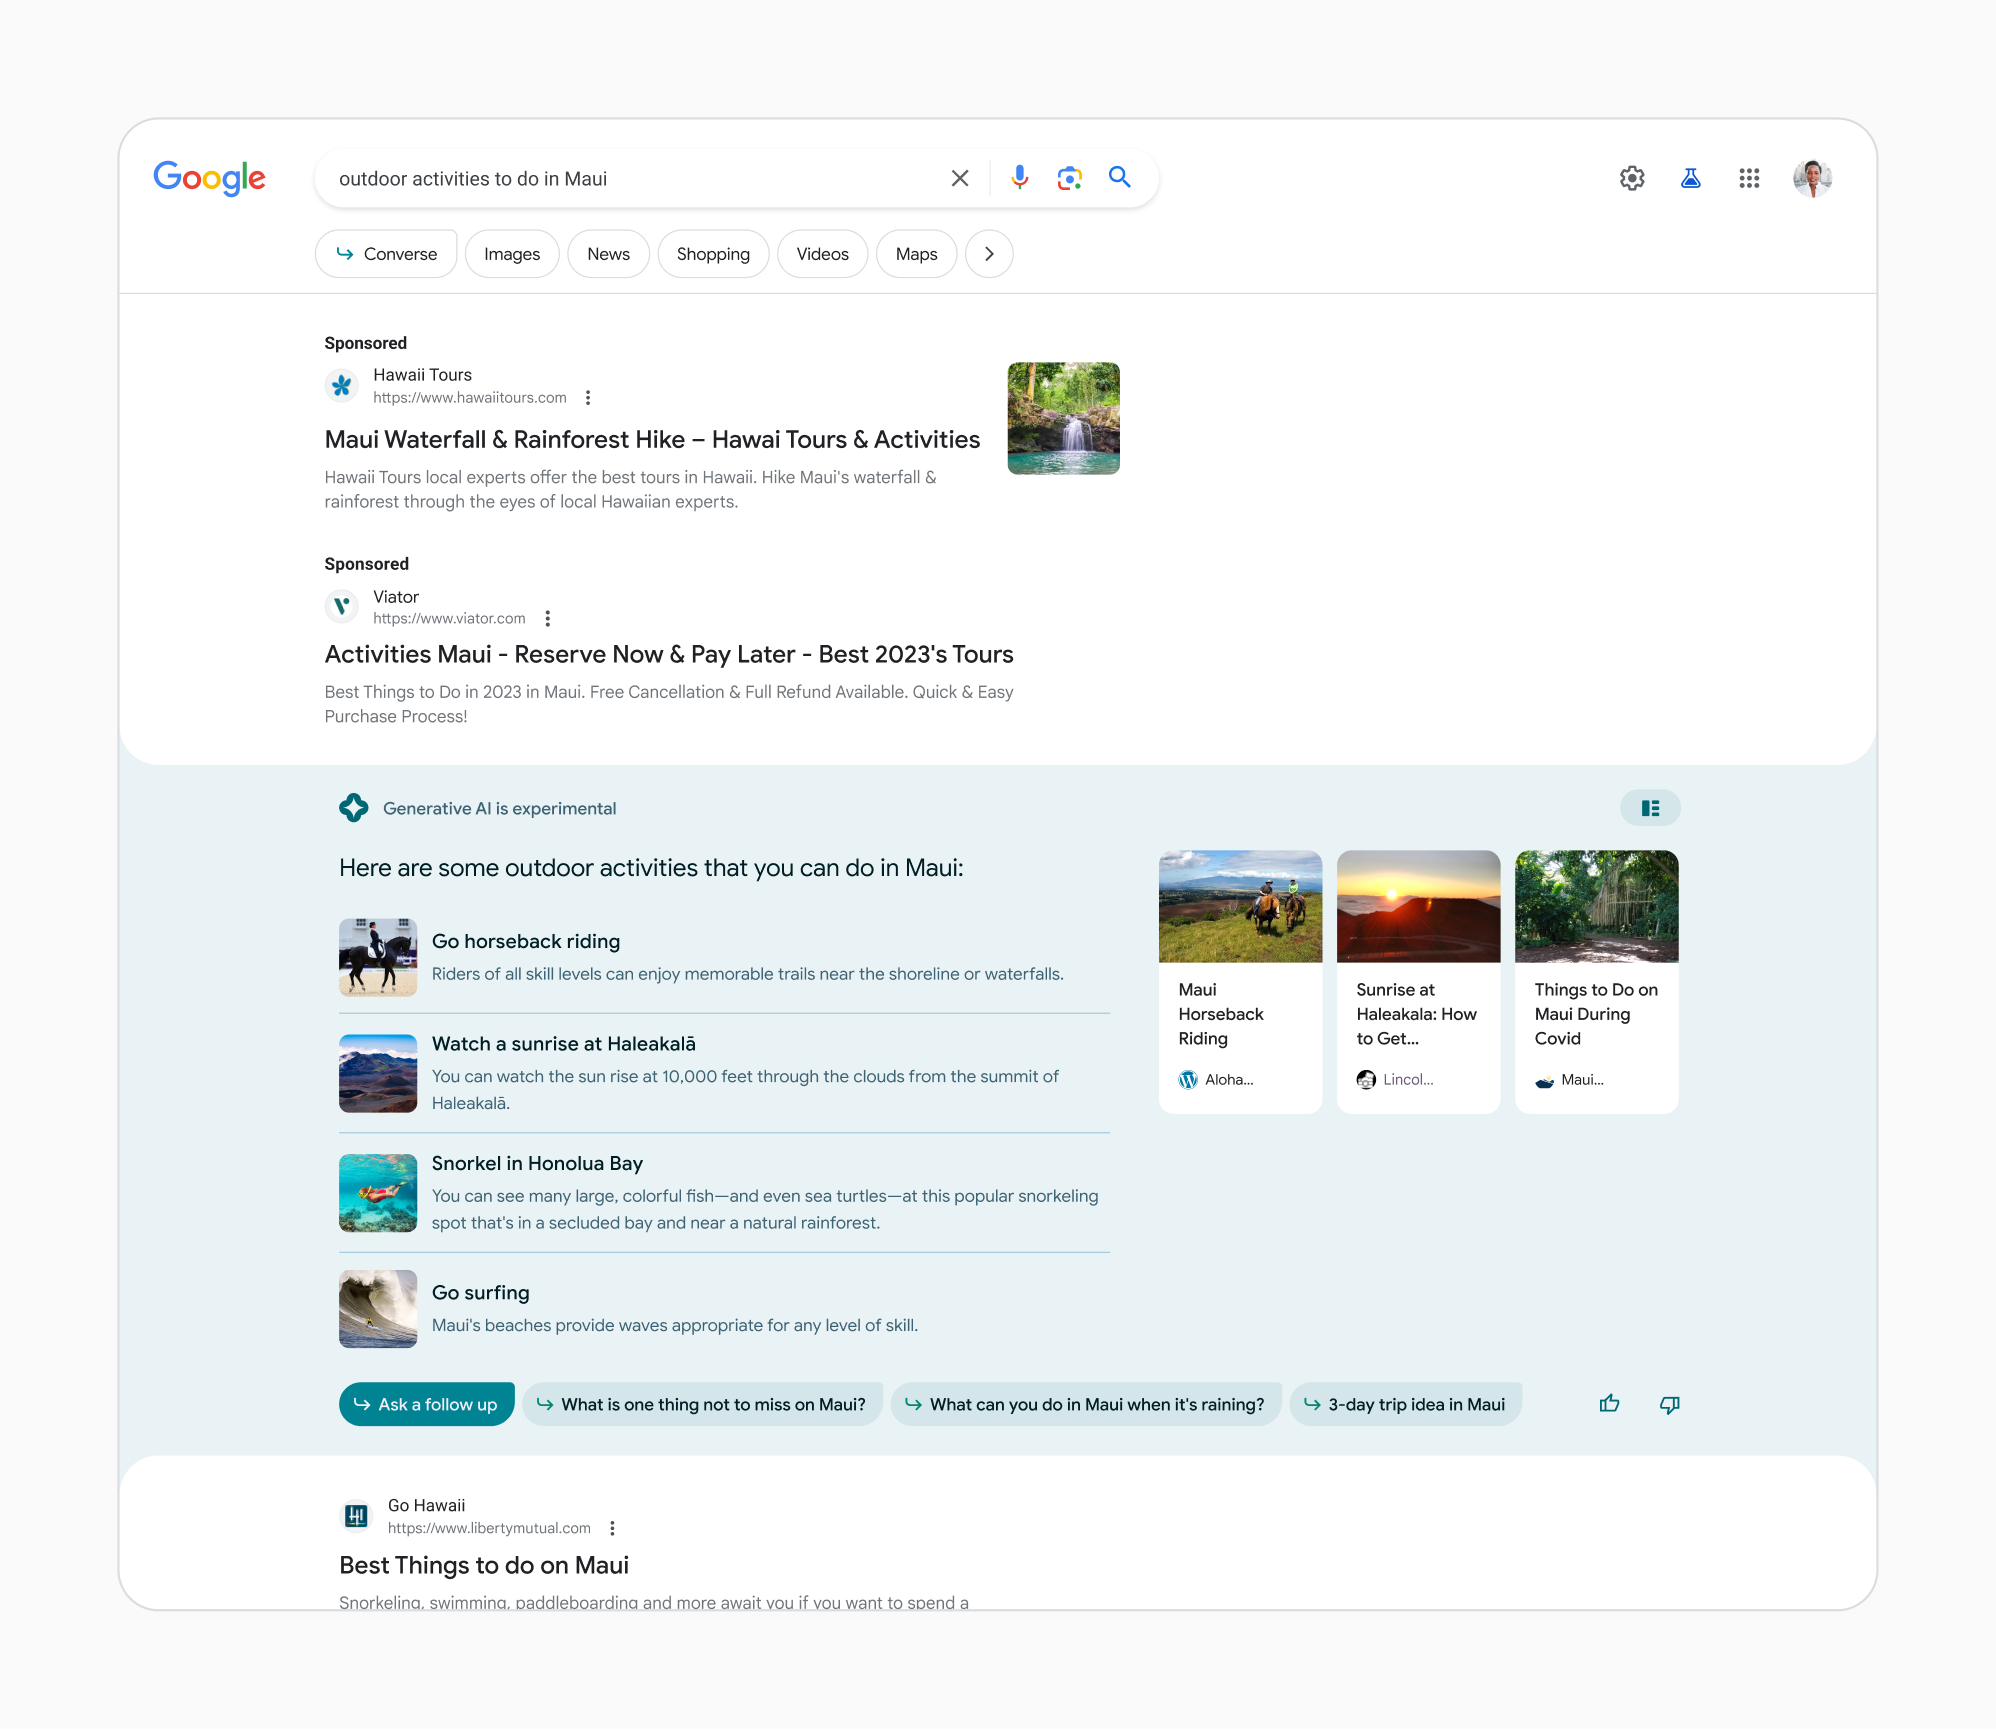 Google Marketing Live 2023: New Generative AI Features For Google Ads, Product Studio, And More